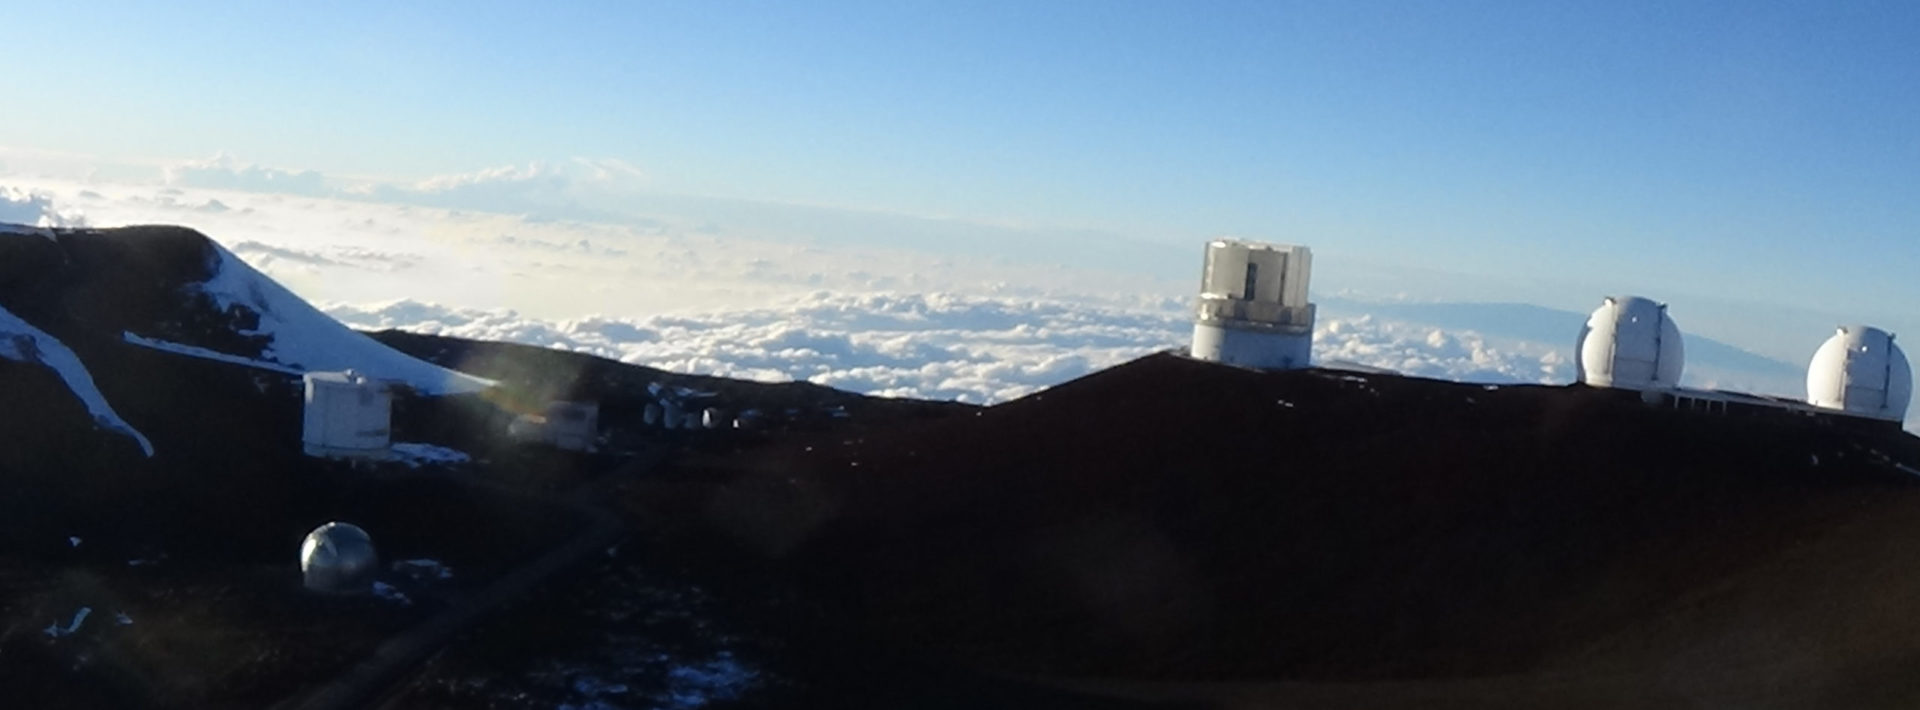 TREX 2018 Day 14: Moving Day #3 and Mauna Kea